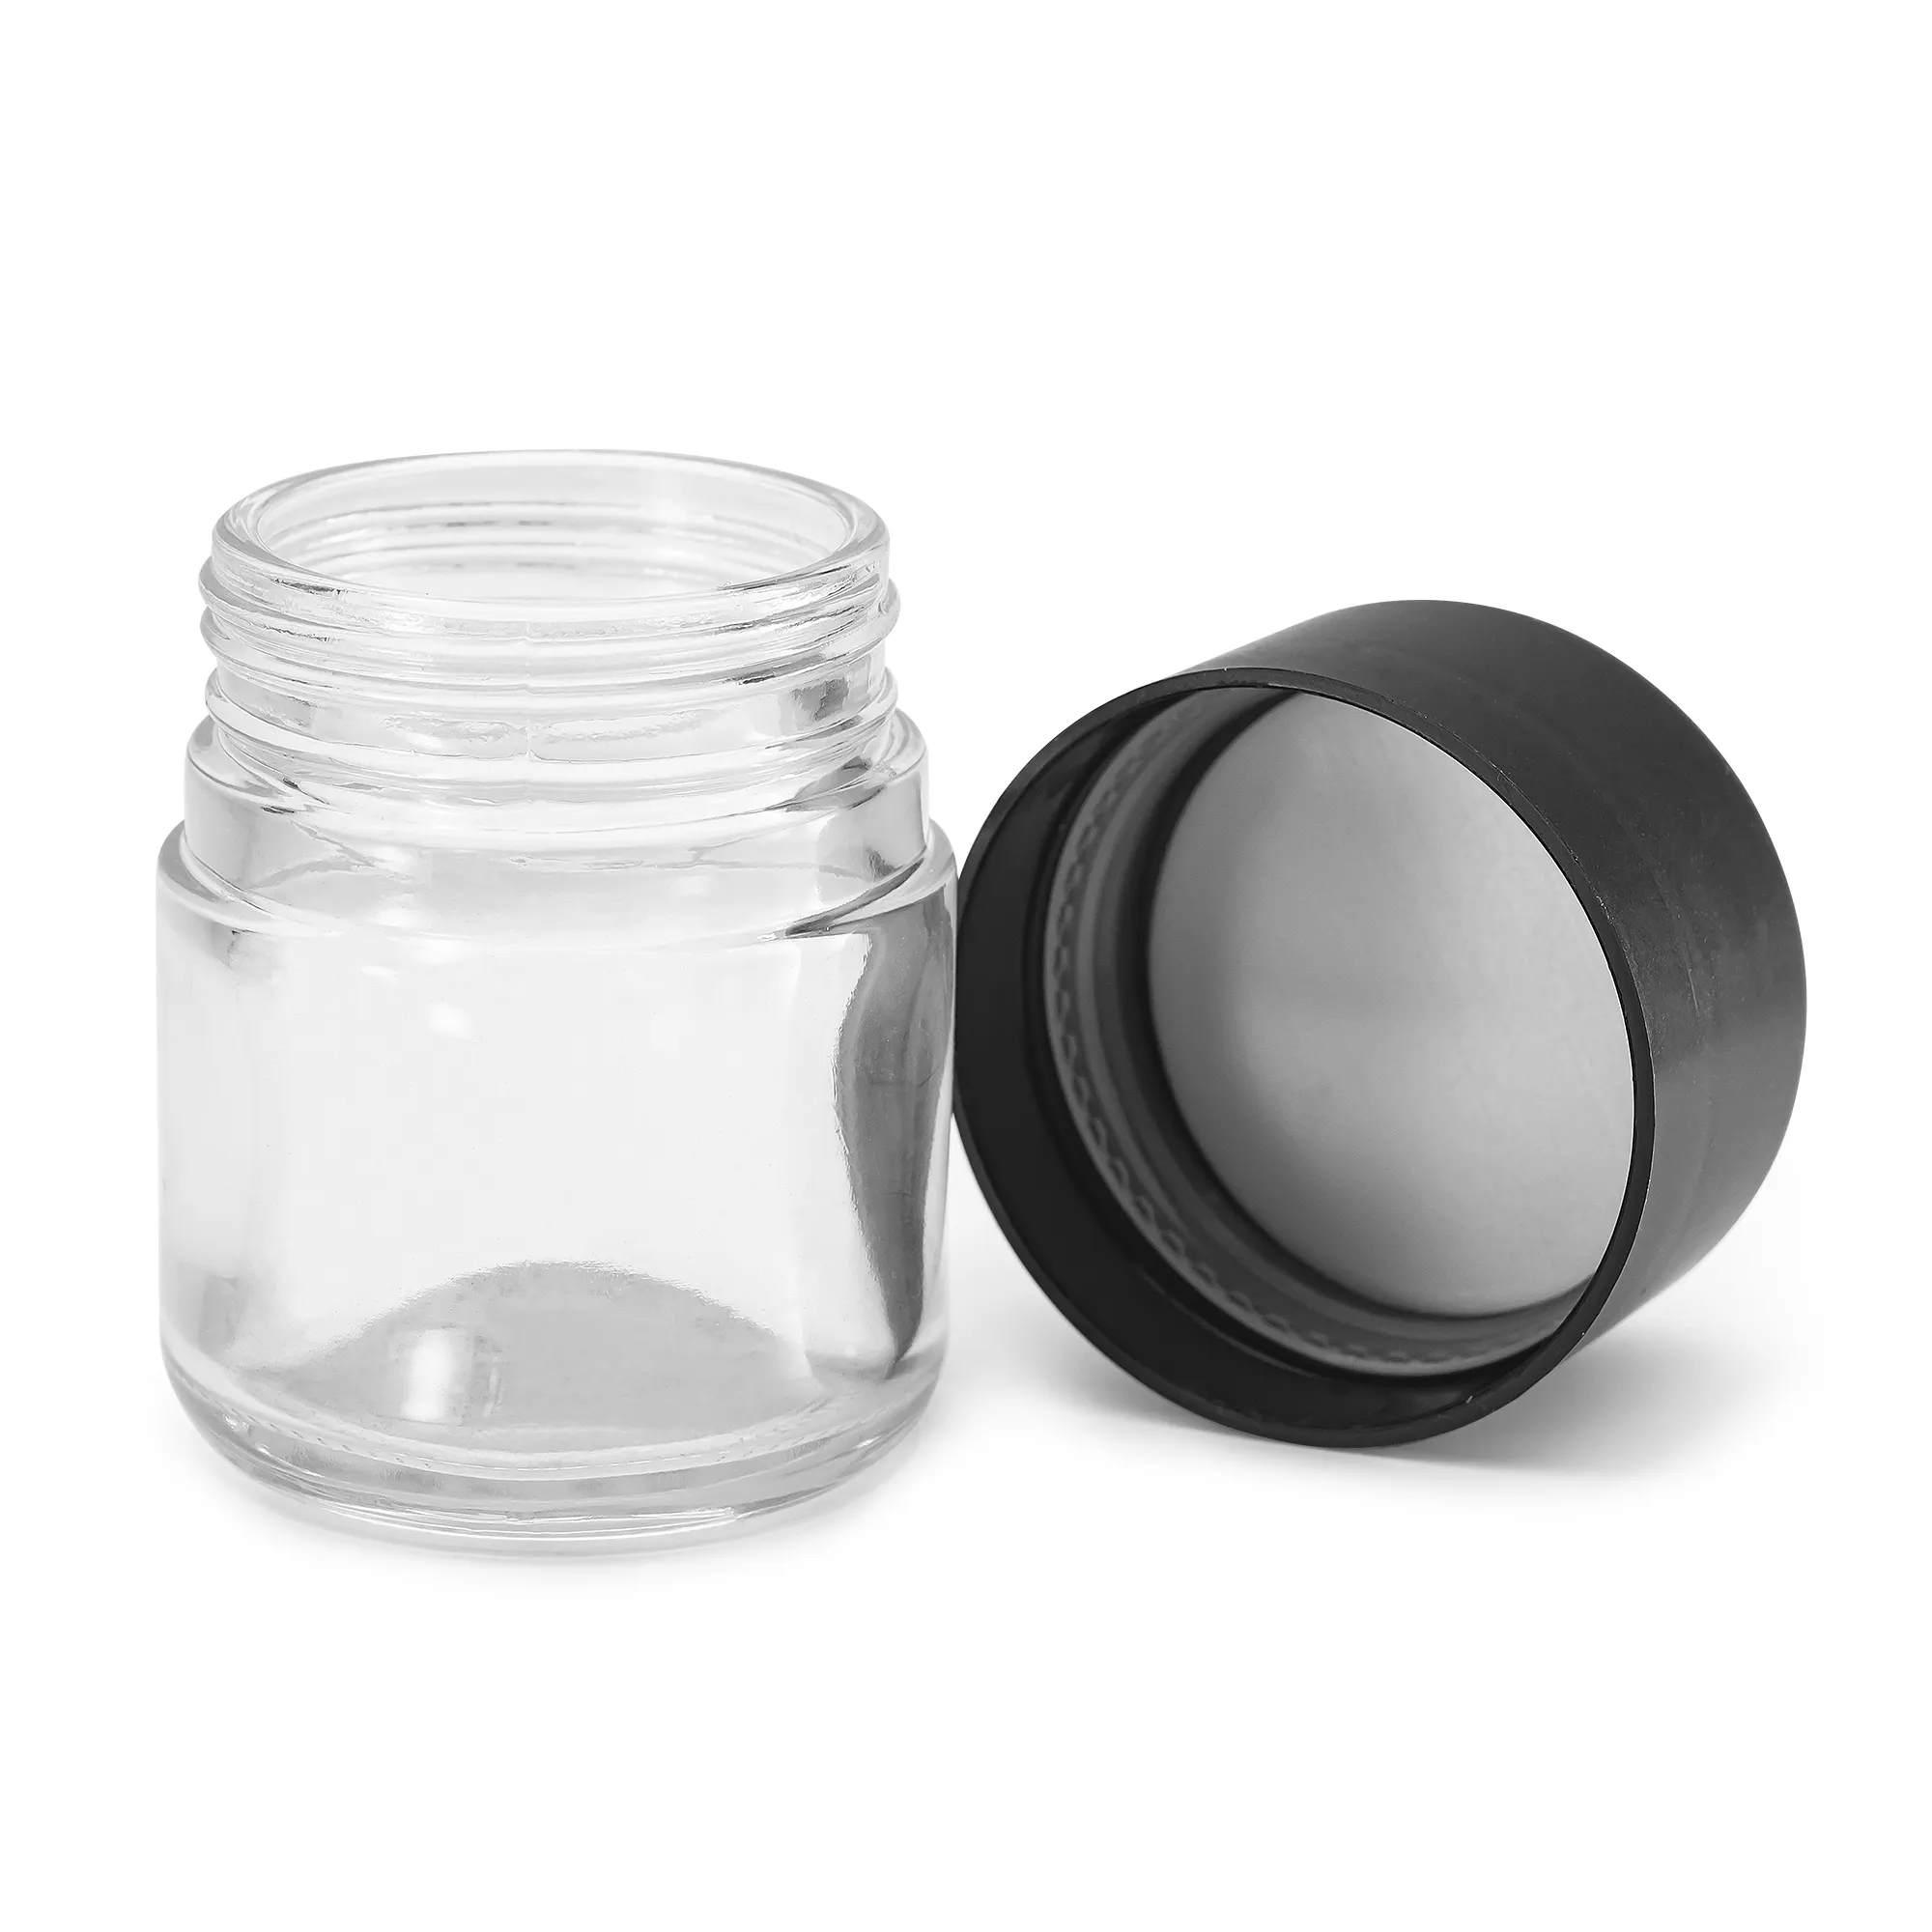 1oz 2oz 3oz 4oz Smell Proof Jar Empty Clear Round Flower Containers Childproof Child Resistant Glass Jar With CR Cap